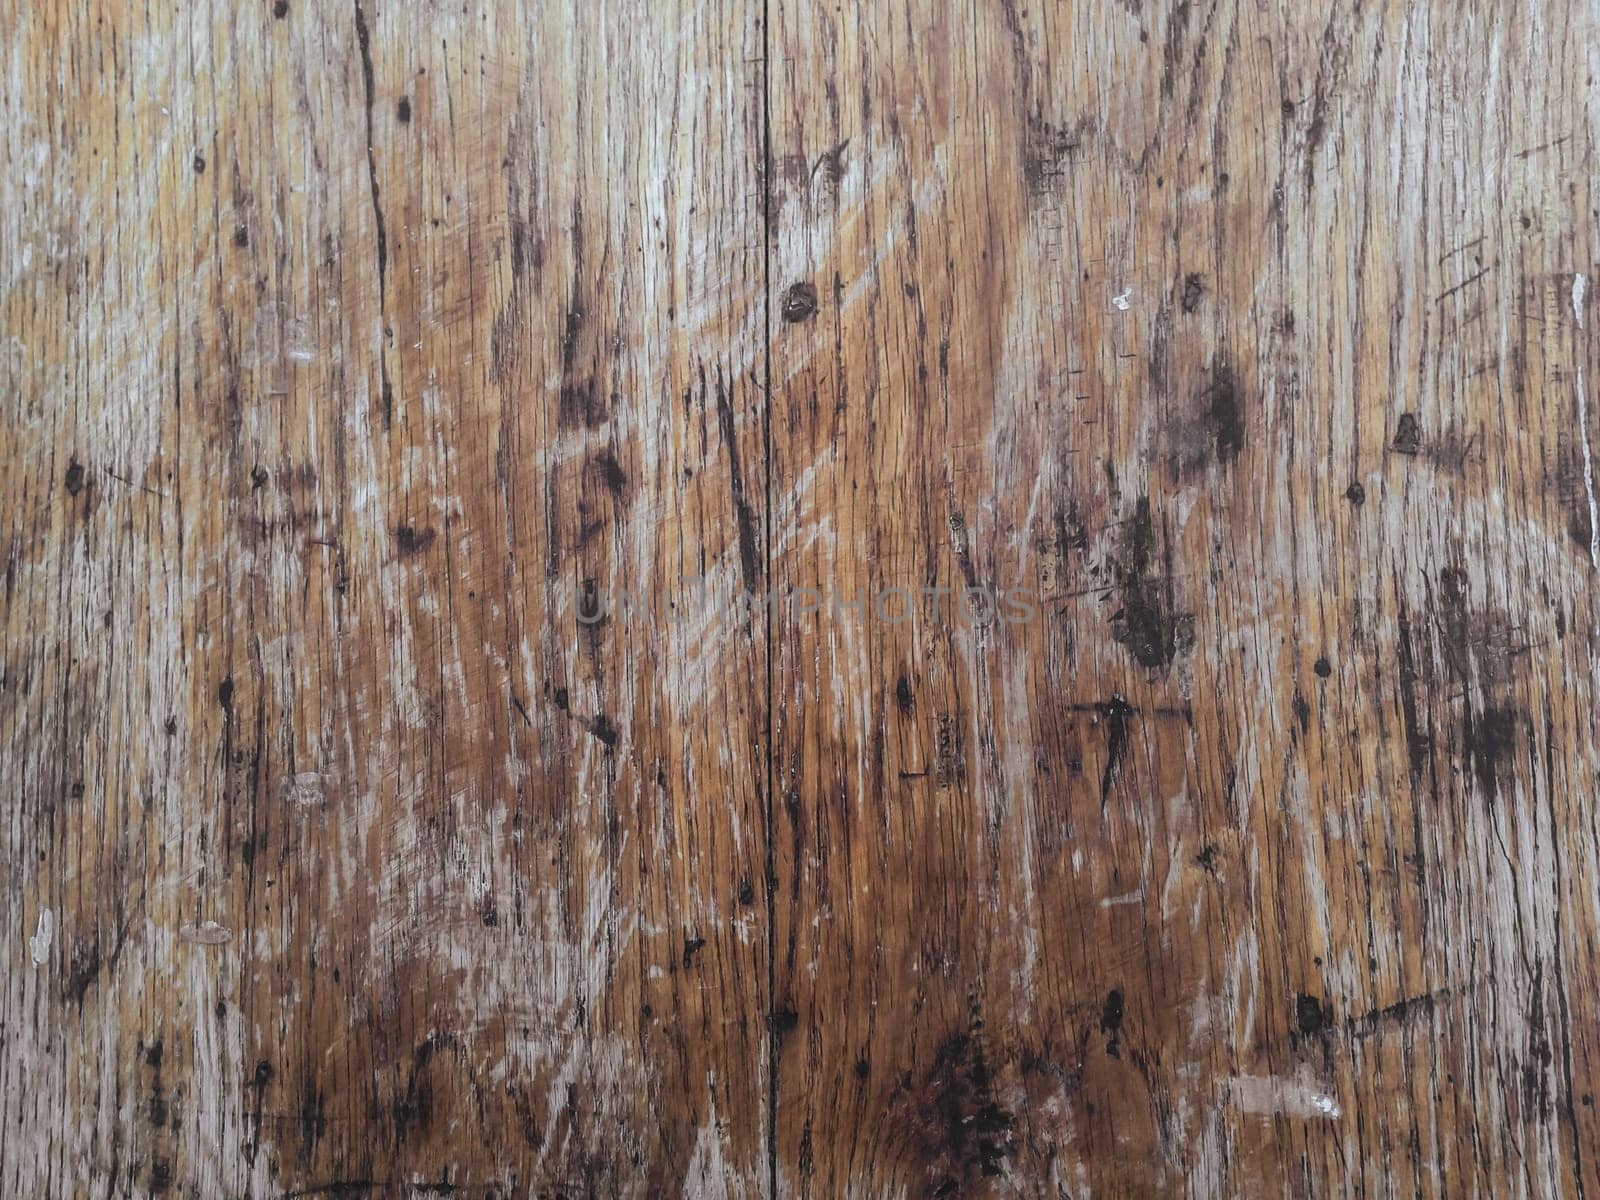 The image is of a wooden surface with a lot of scratches and marks. The surface appears to be old and worn, giving it a sense of history and character